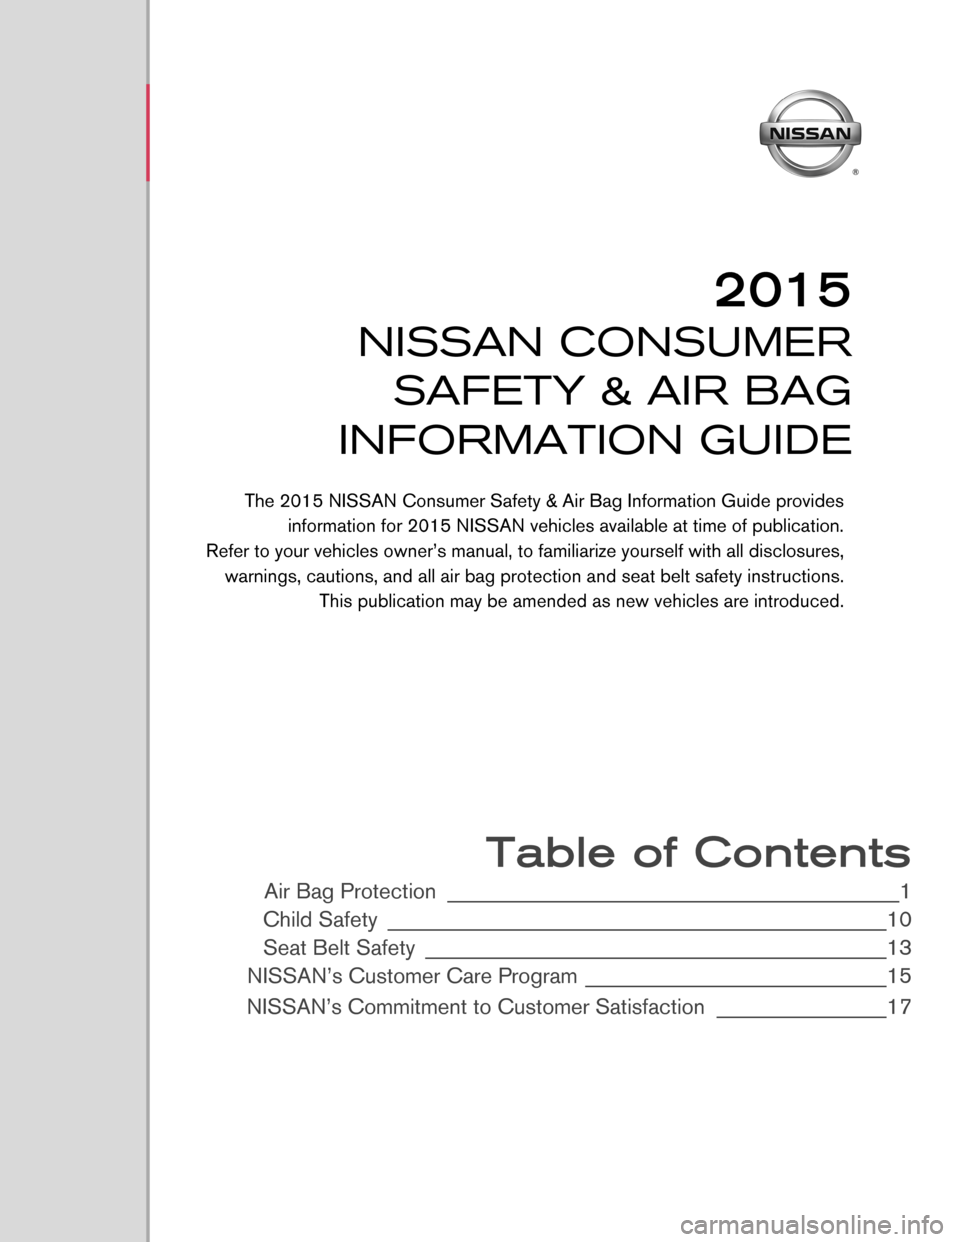 NISSAN 370Z ROADSTER 2015 Z34 Consumer Safety Air Bag Information Guide  
 
 
 
 
 
 
 
 
 
 
 
 
 
 
 
 
 
 
 
 
 
 
 Table of Contents 
Air Bag Protection __________________\d__________________\d____________1 
Child \fafety _________________________\d__________________\